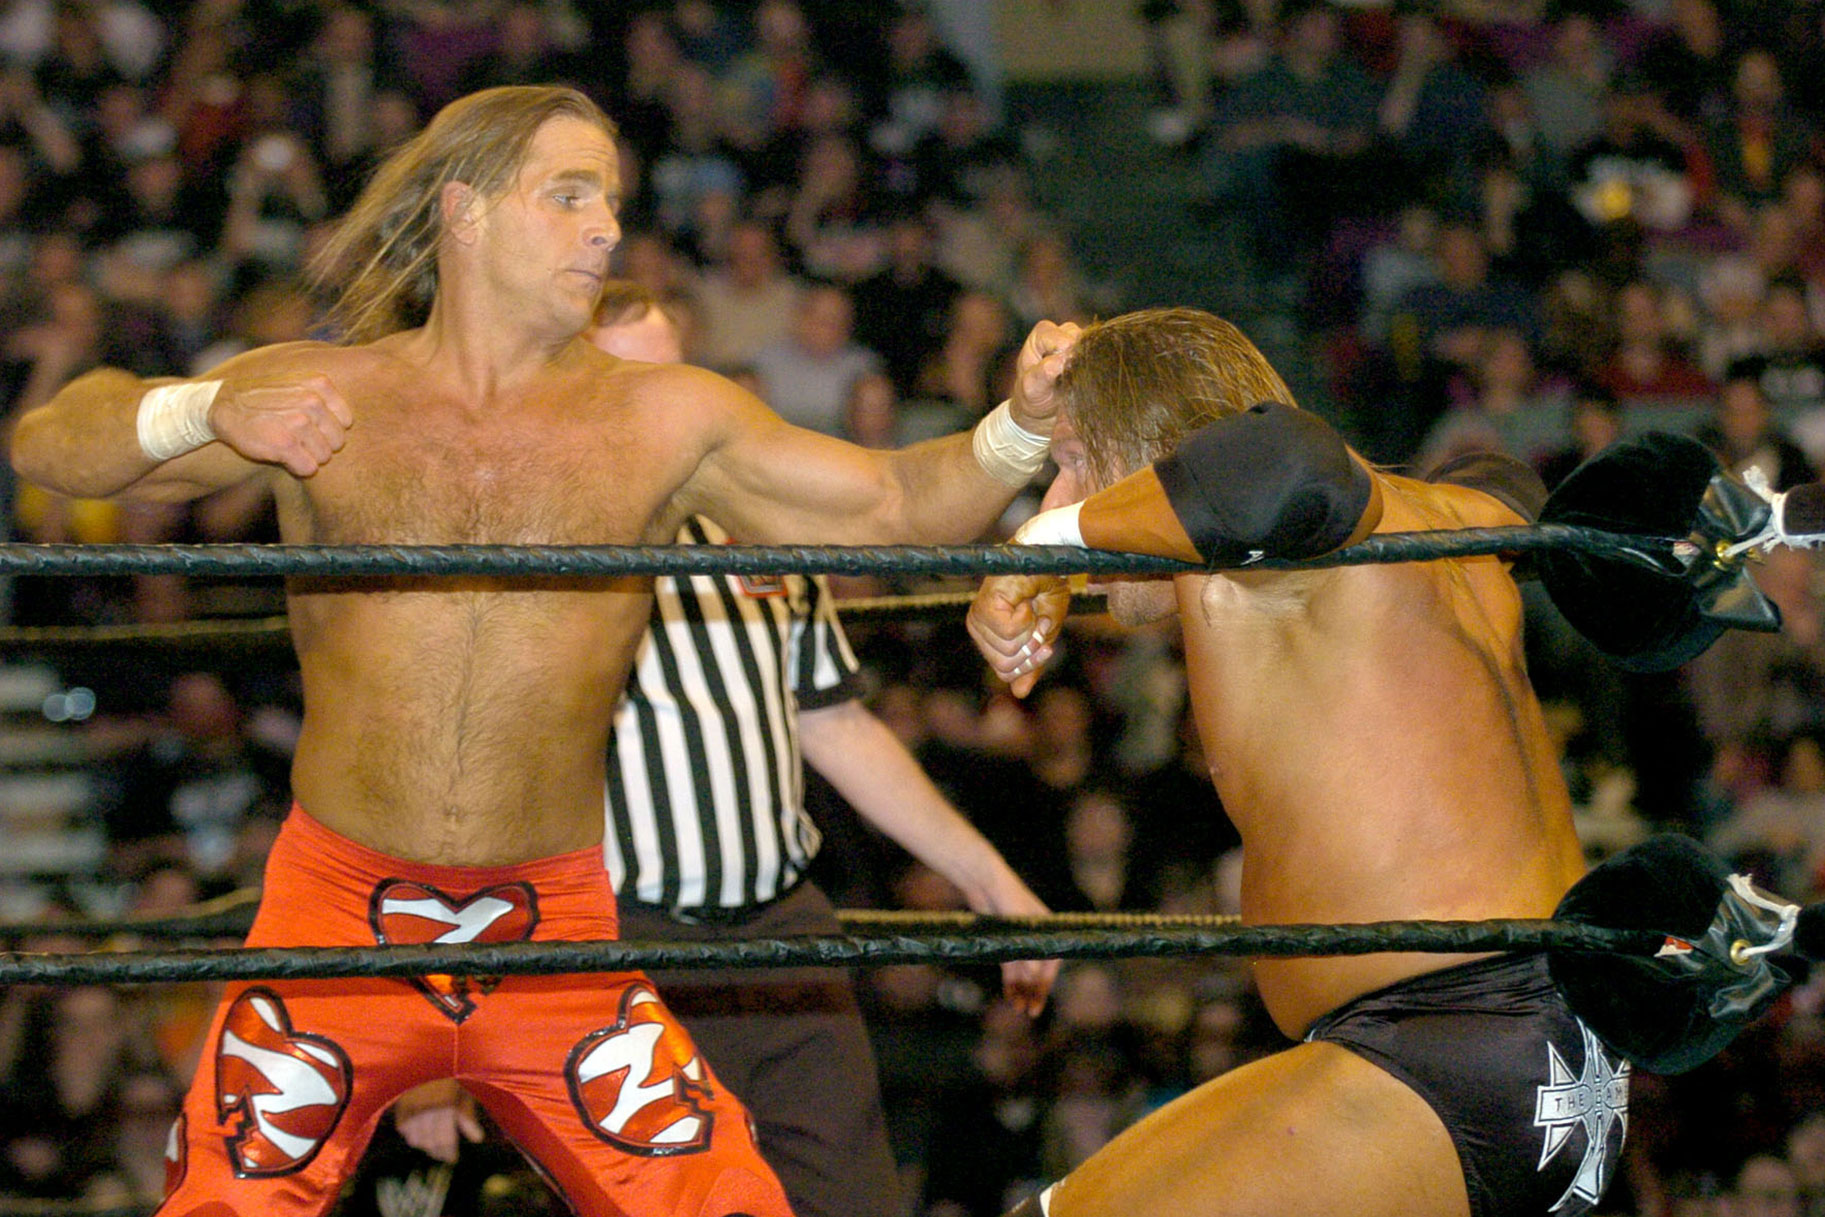 Shawn Michaels punching Triple H in the ring